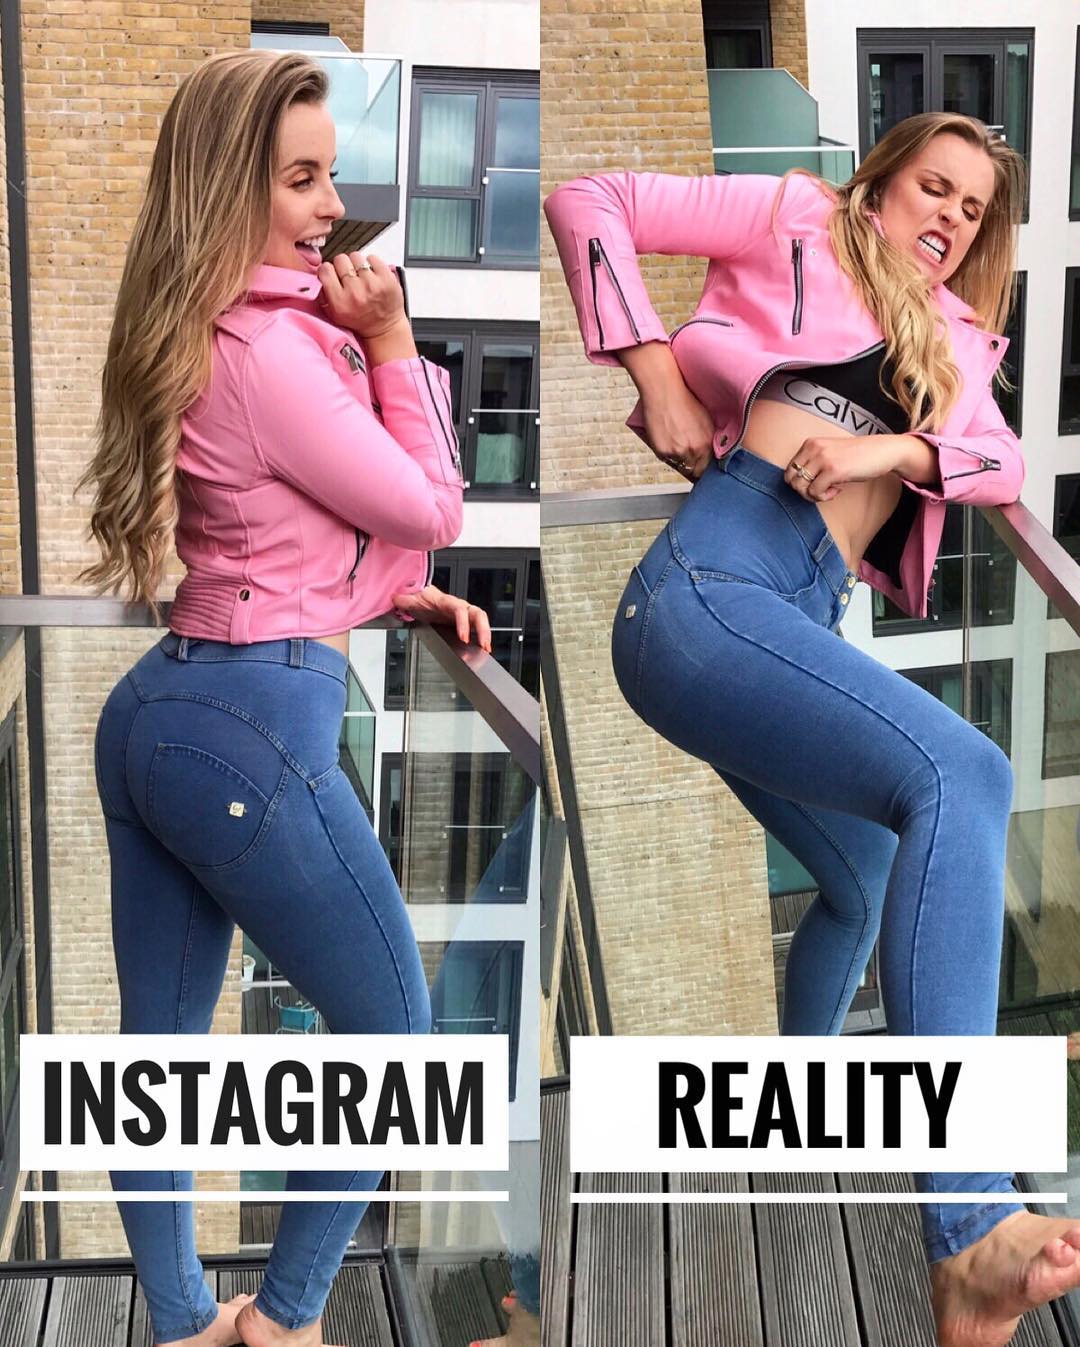 Instagram vs reality Fitness bloger shares side by side photos to show